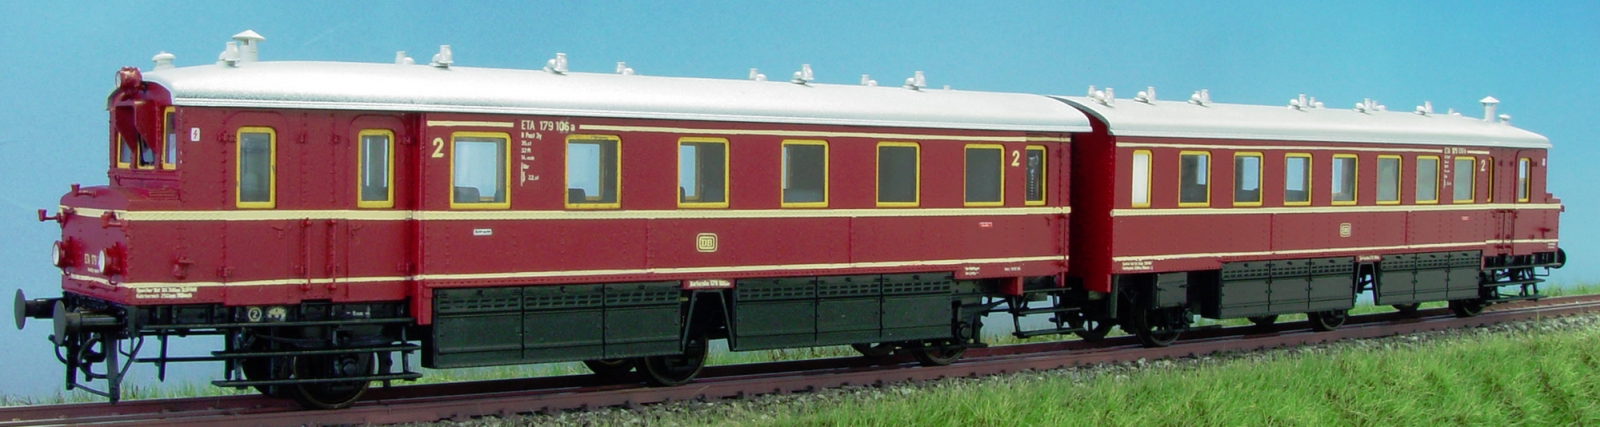 H0 model by model railway manufacture Crottendorf